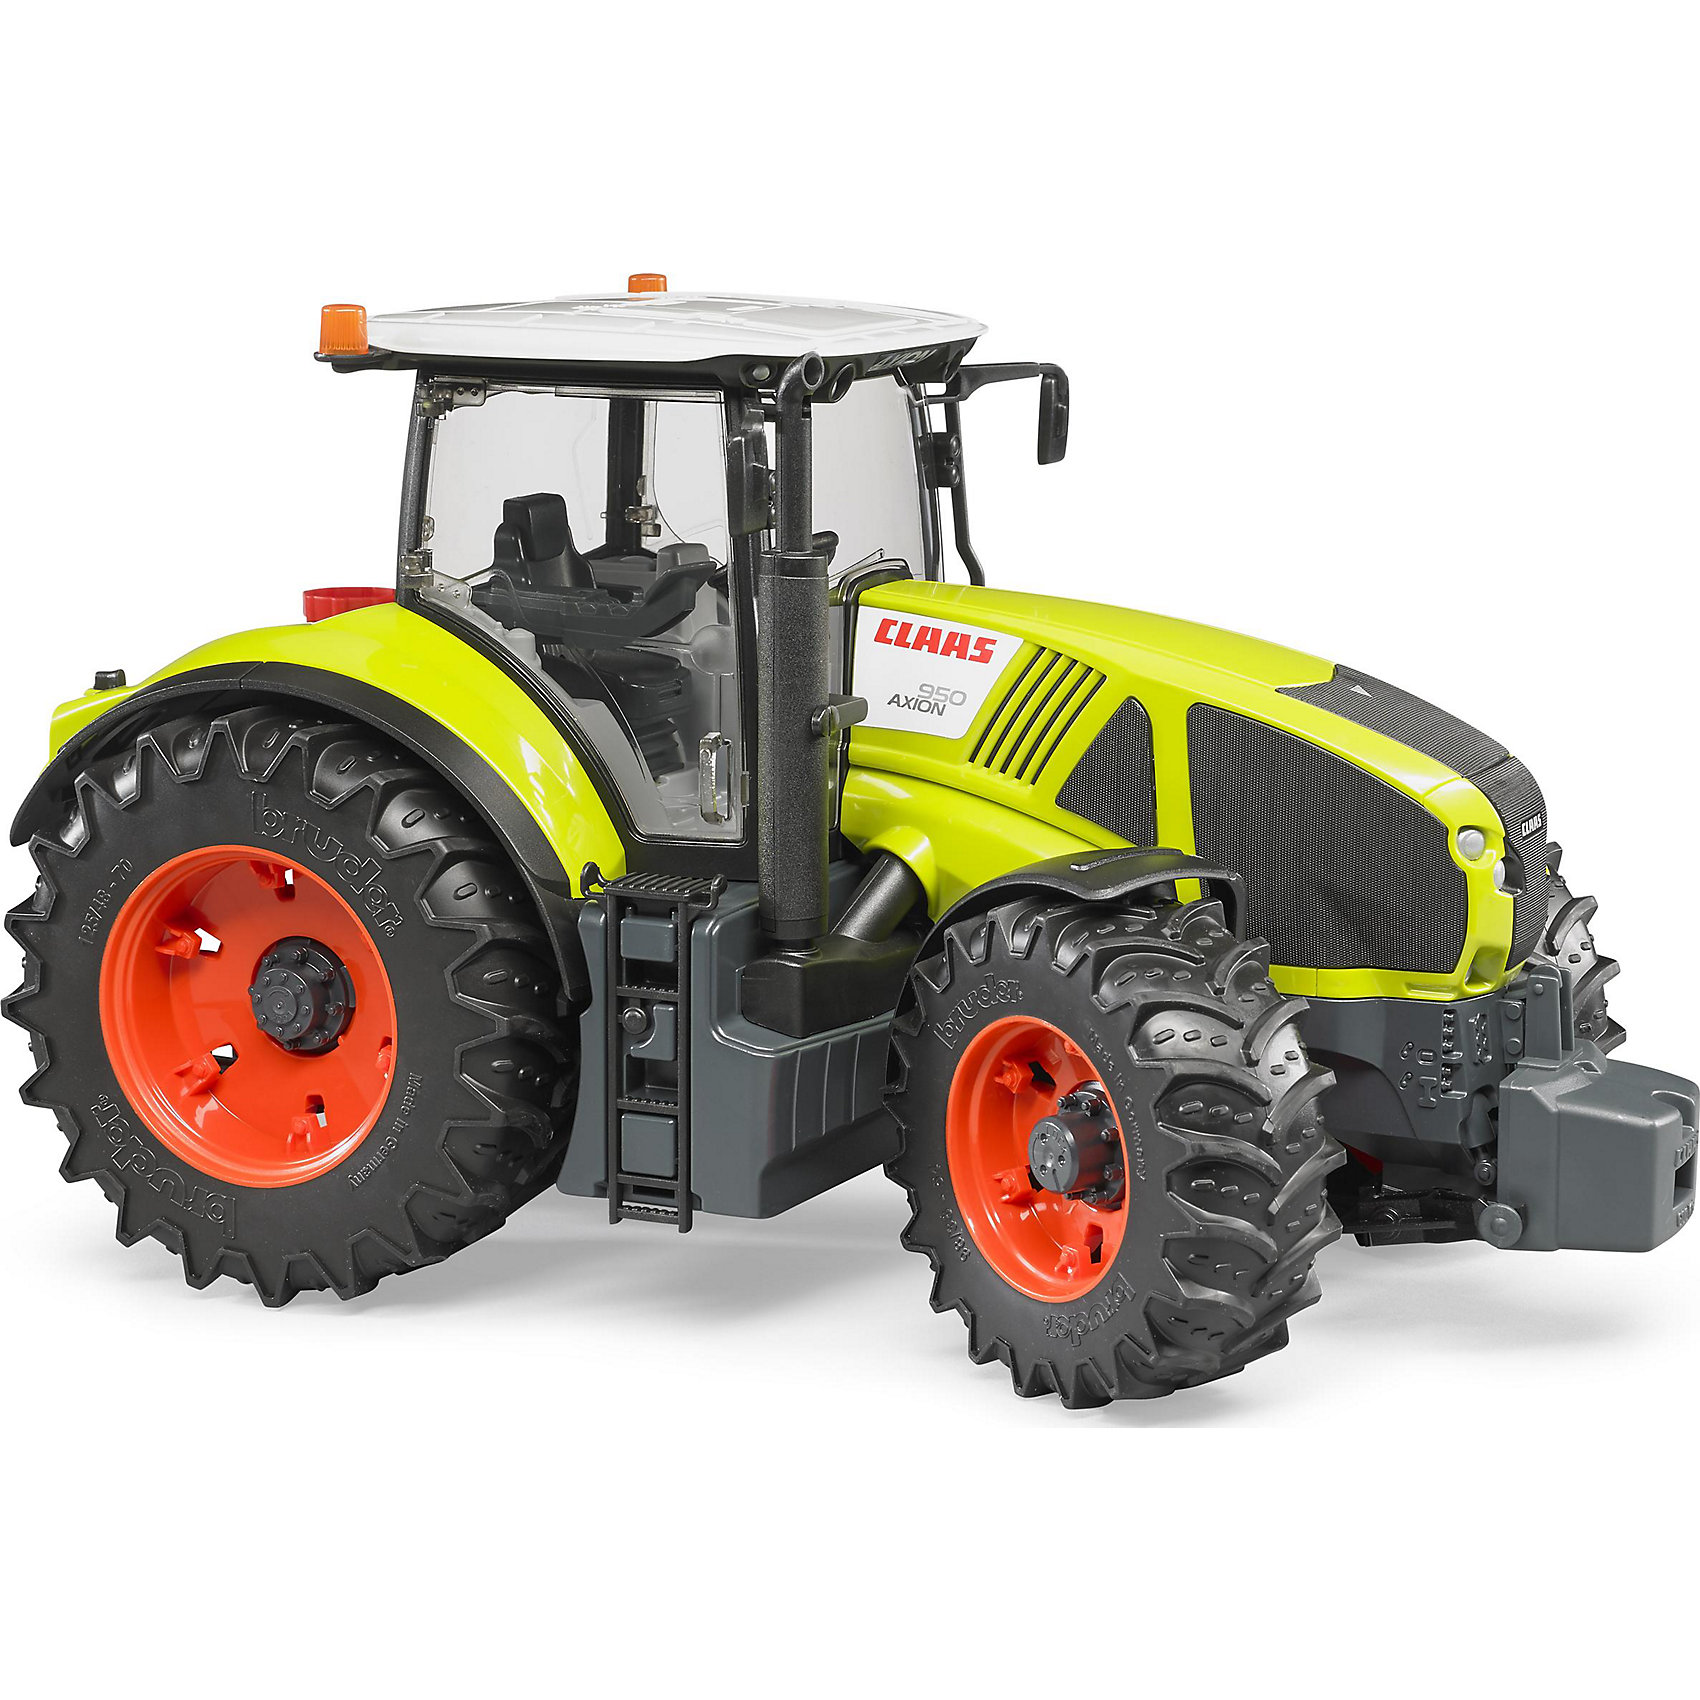 Claas axion 950 tractor price, hp, specs, review 2023